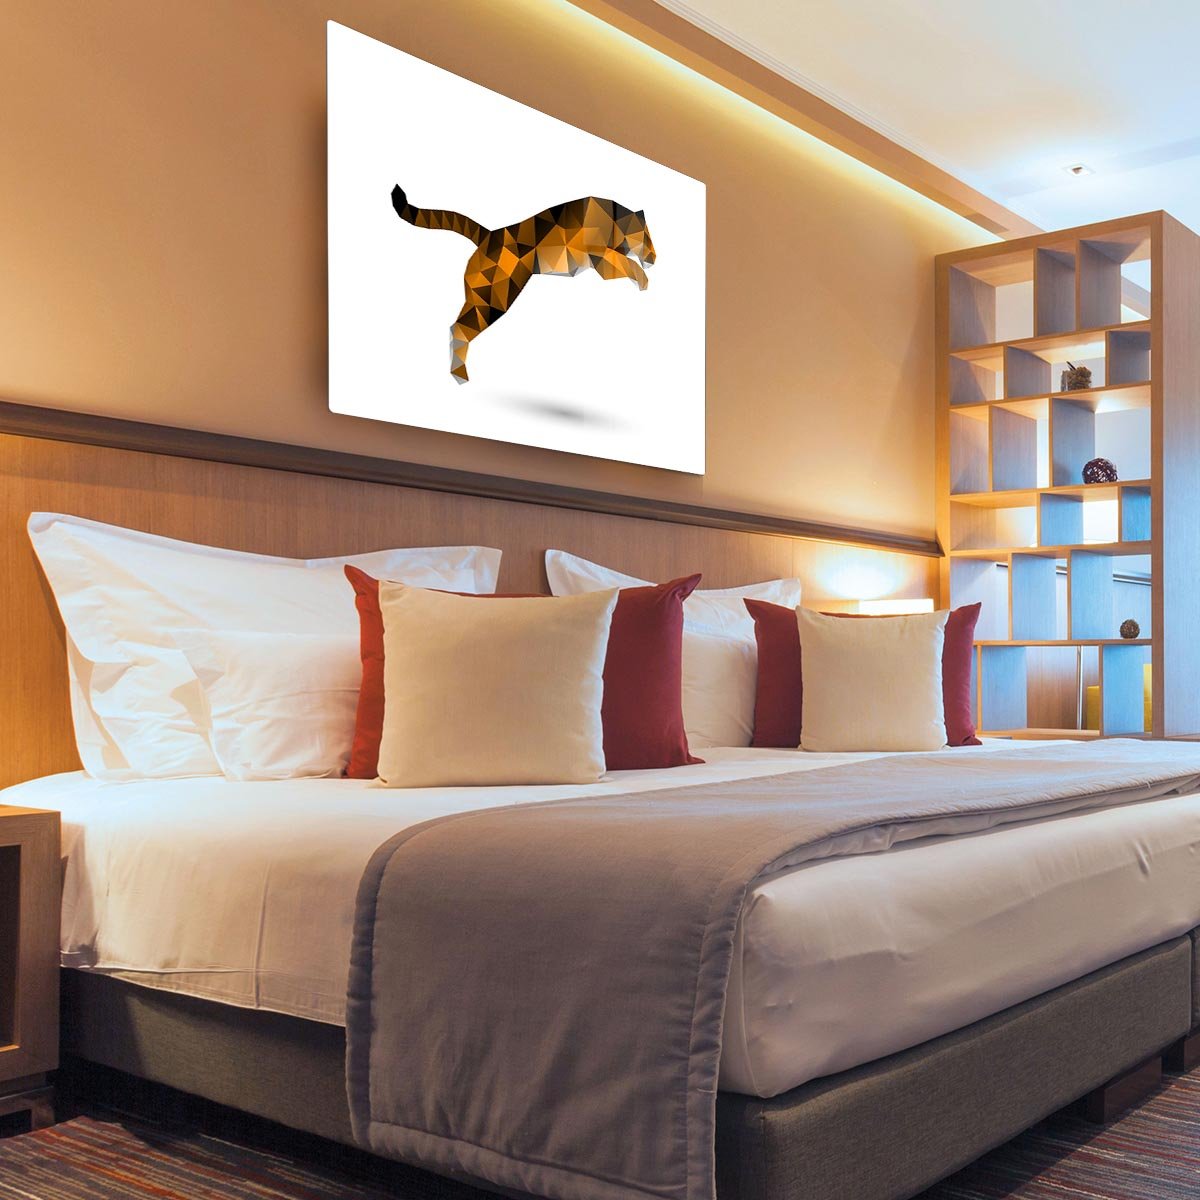 Leaping tiger from polygons HD Metal Print - Canvas Art Rocks - 3